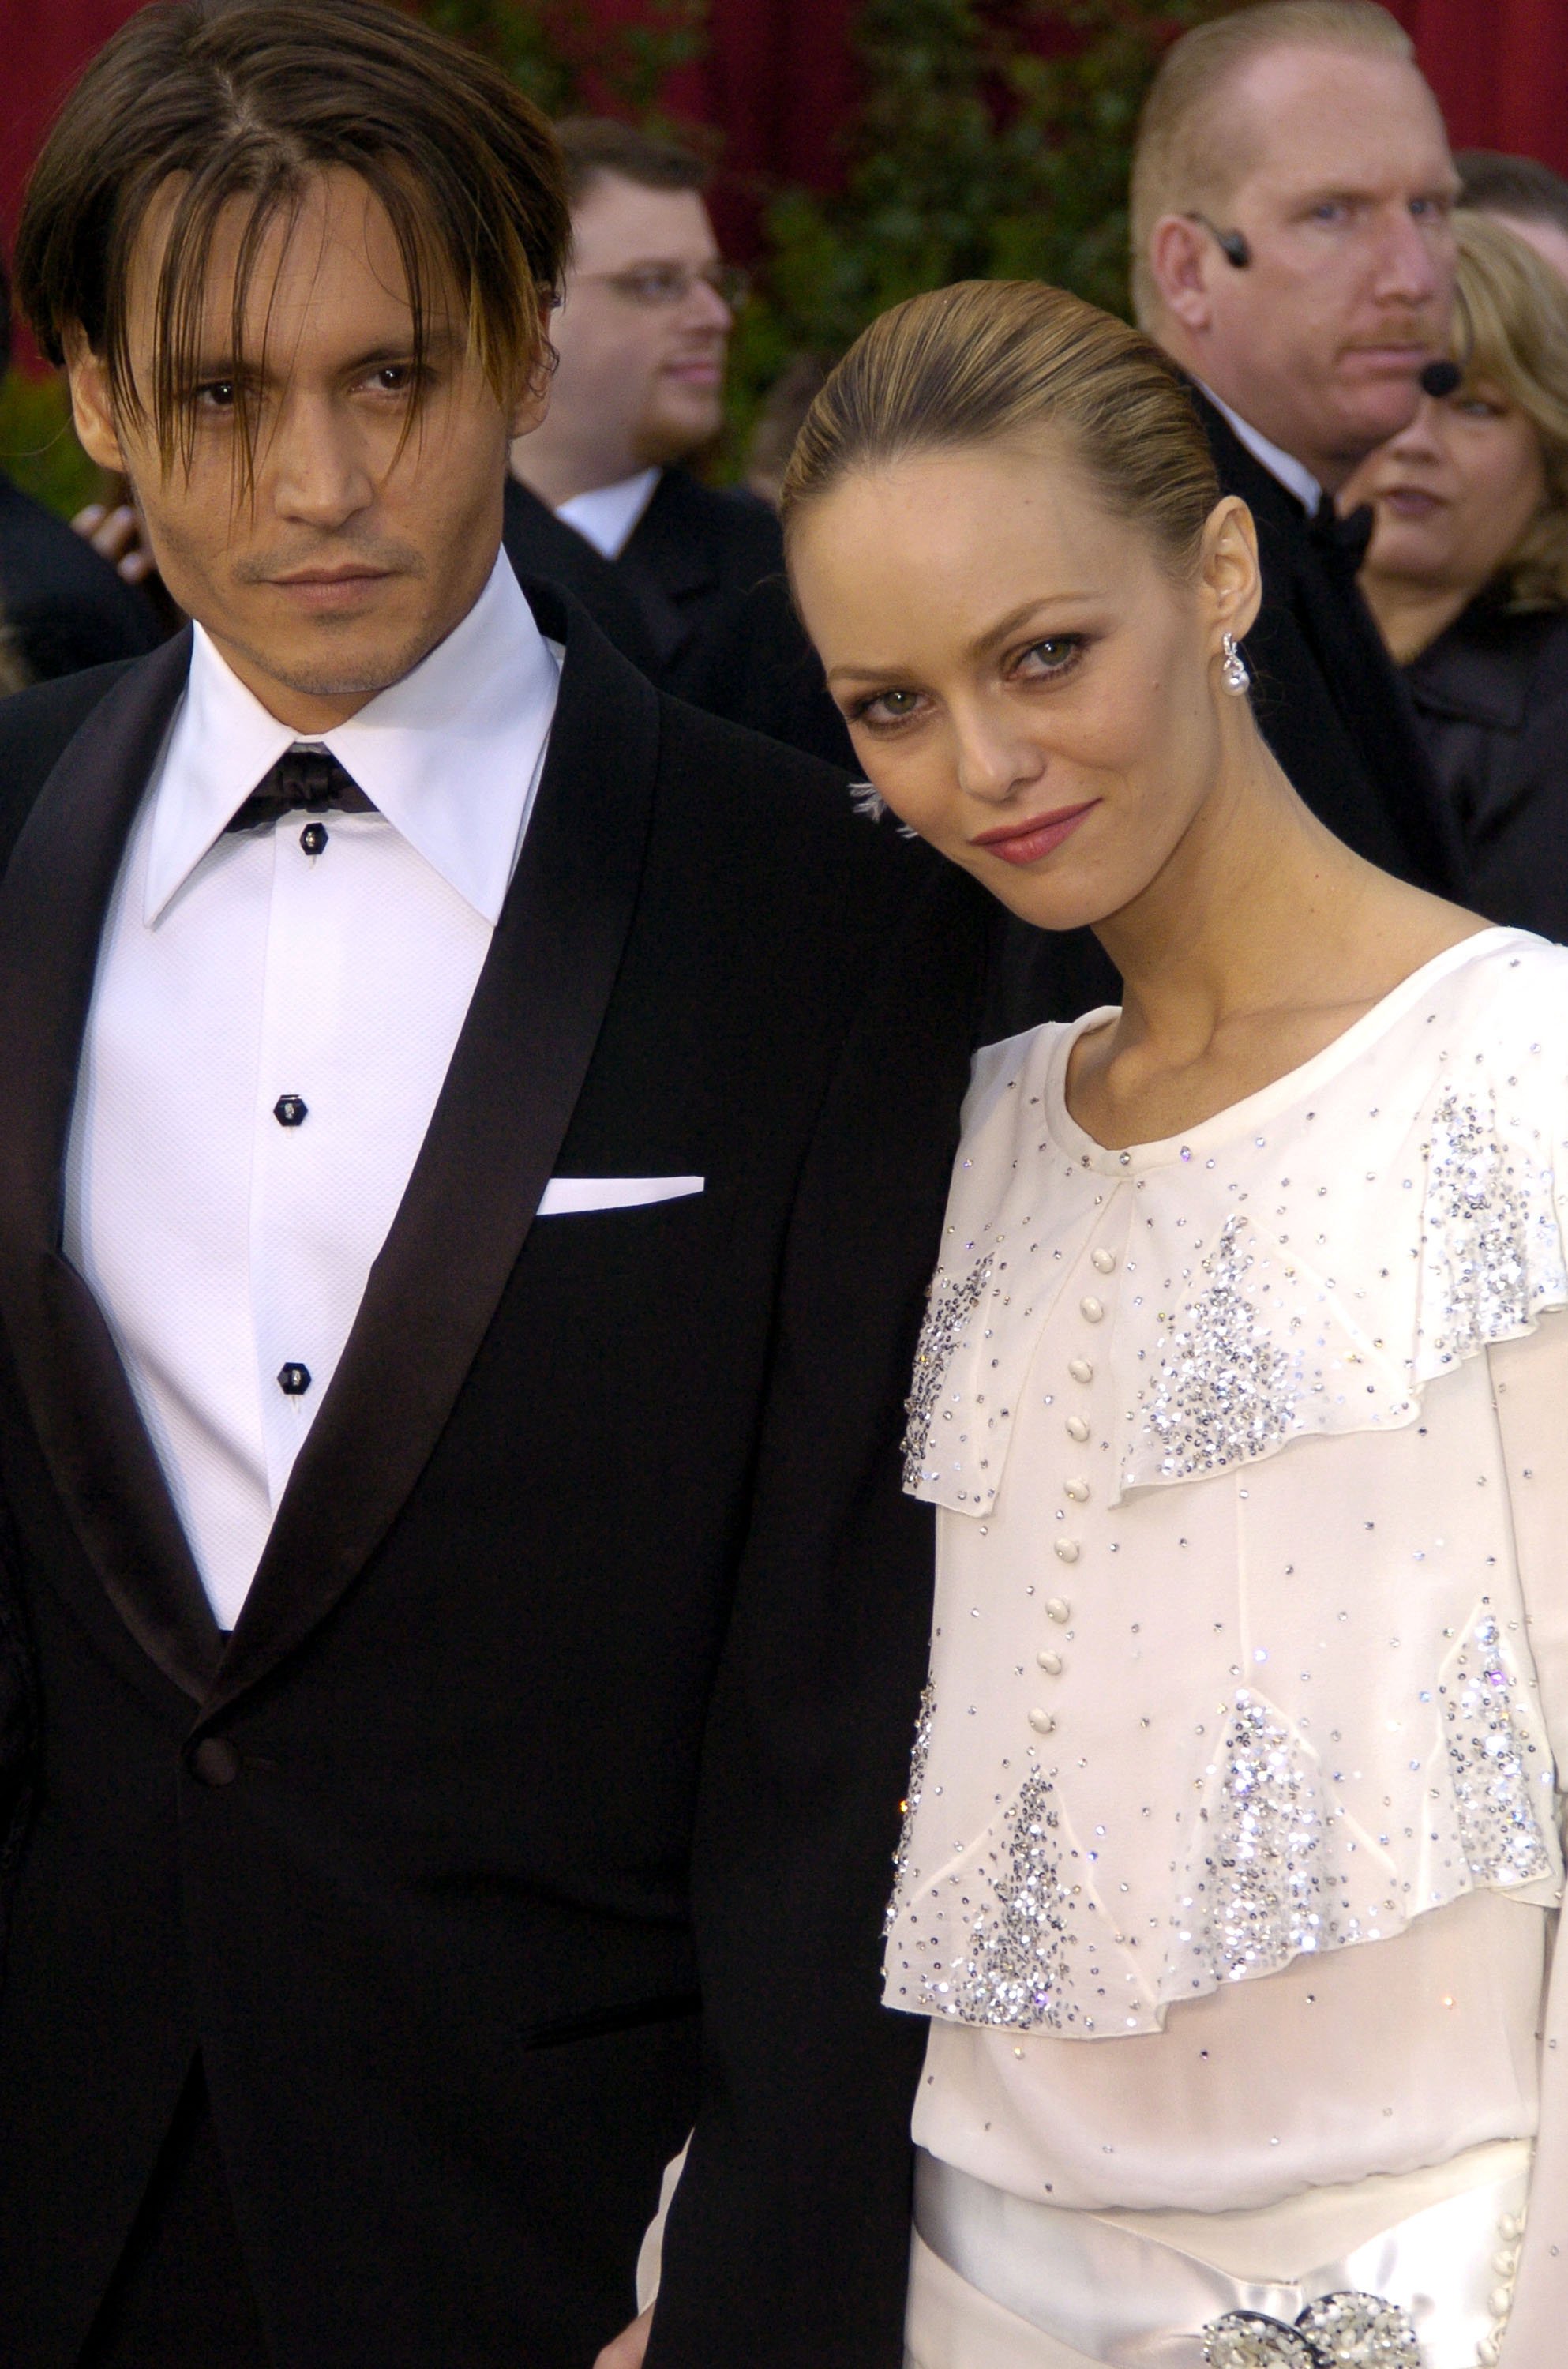 Johnny Depp and Vanessa Paradis in California in 2004 | Source: Getty Images